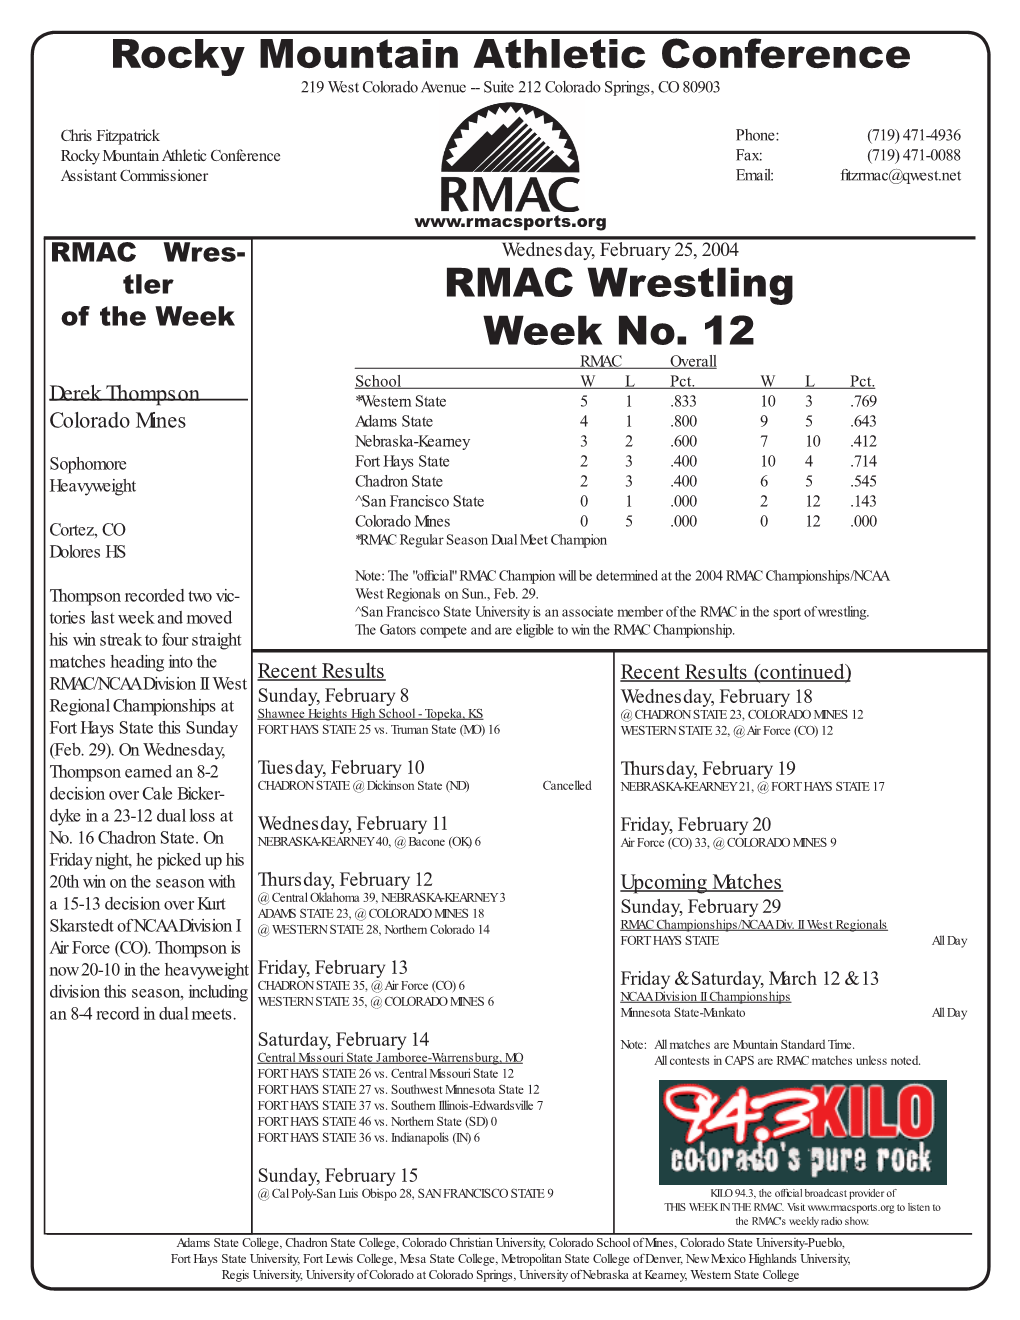 RMAC Wrestling Week No. 12 Rocky Mountain Athletic Conference